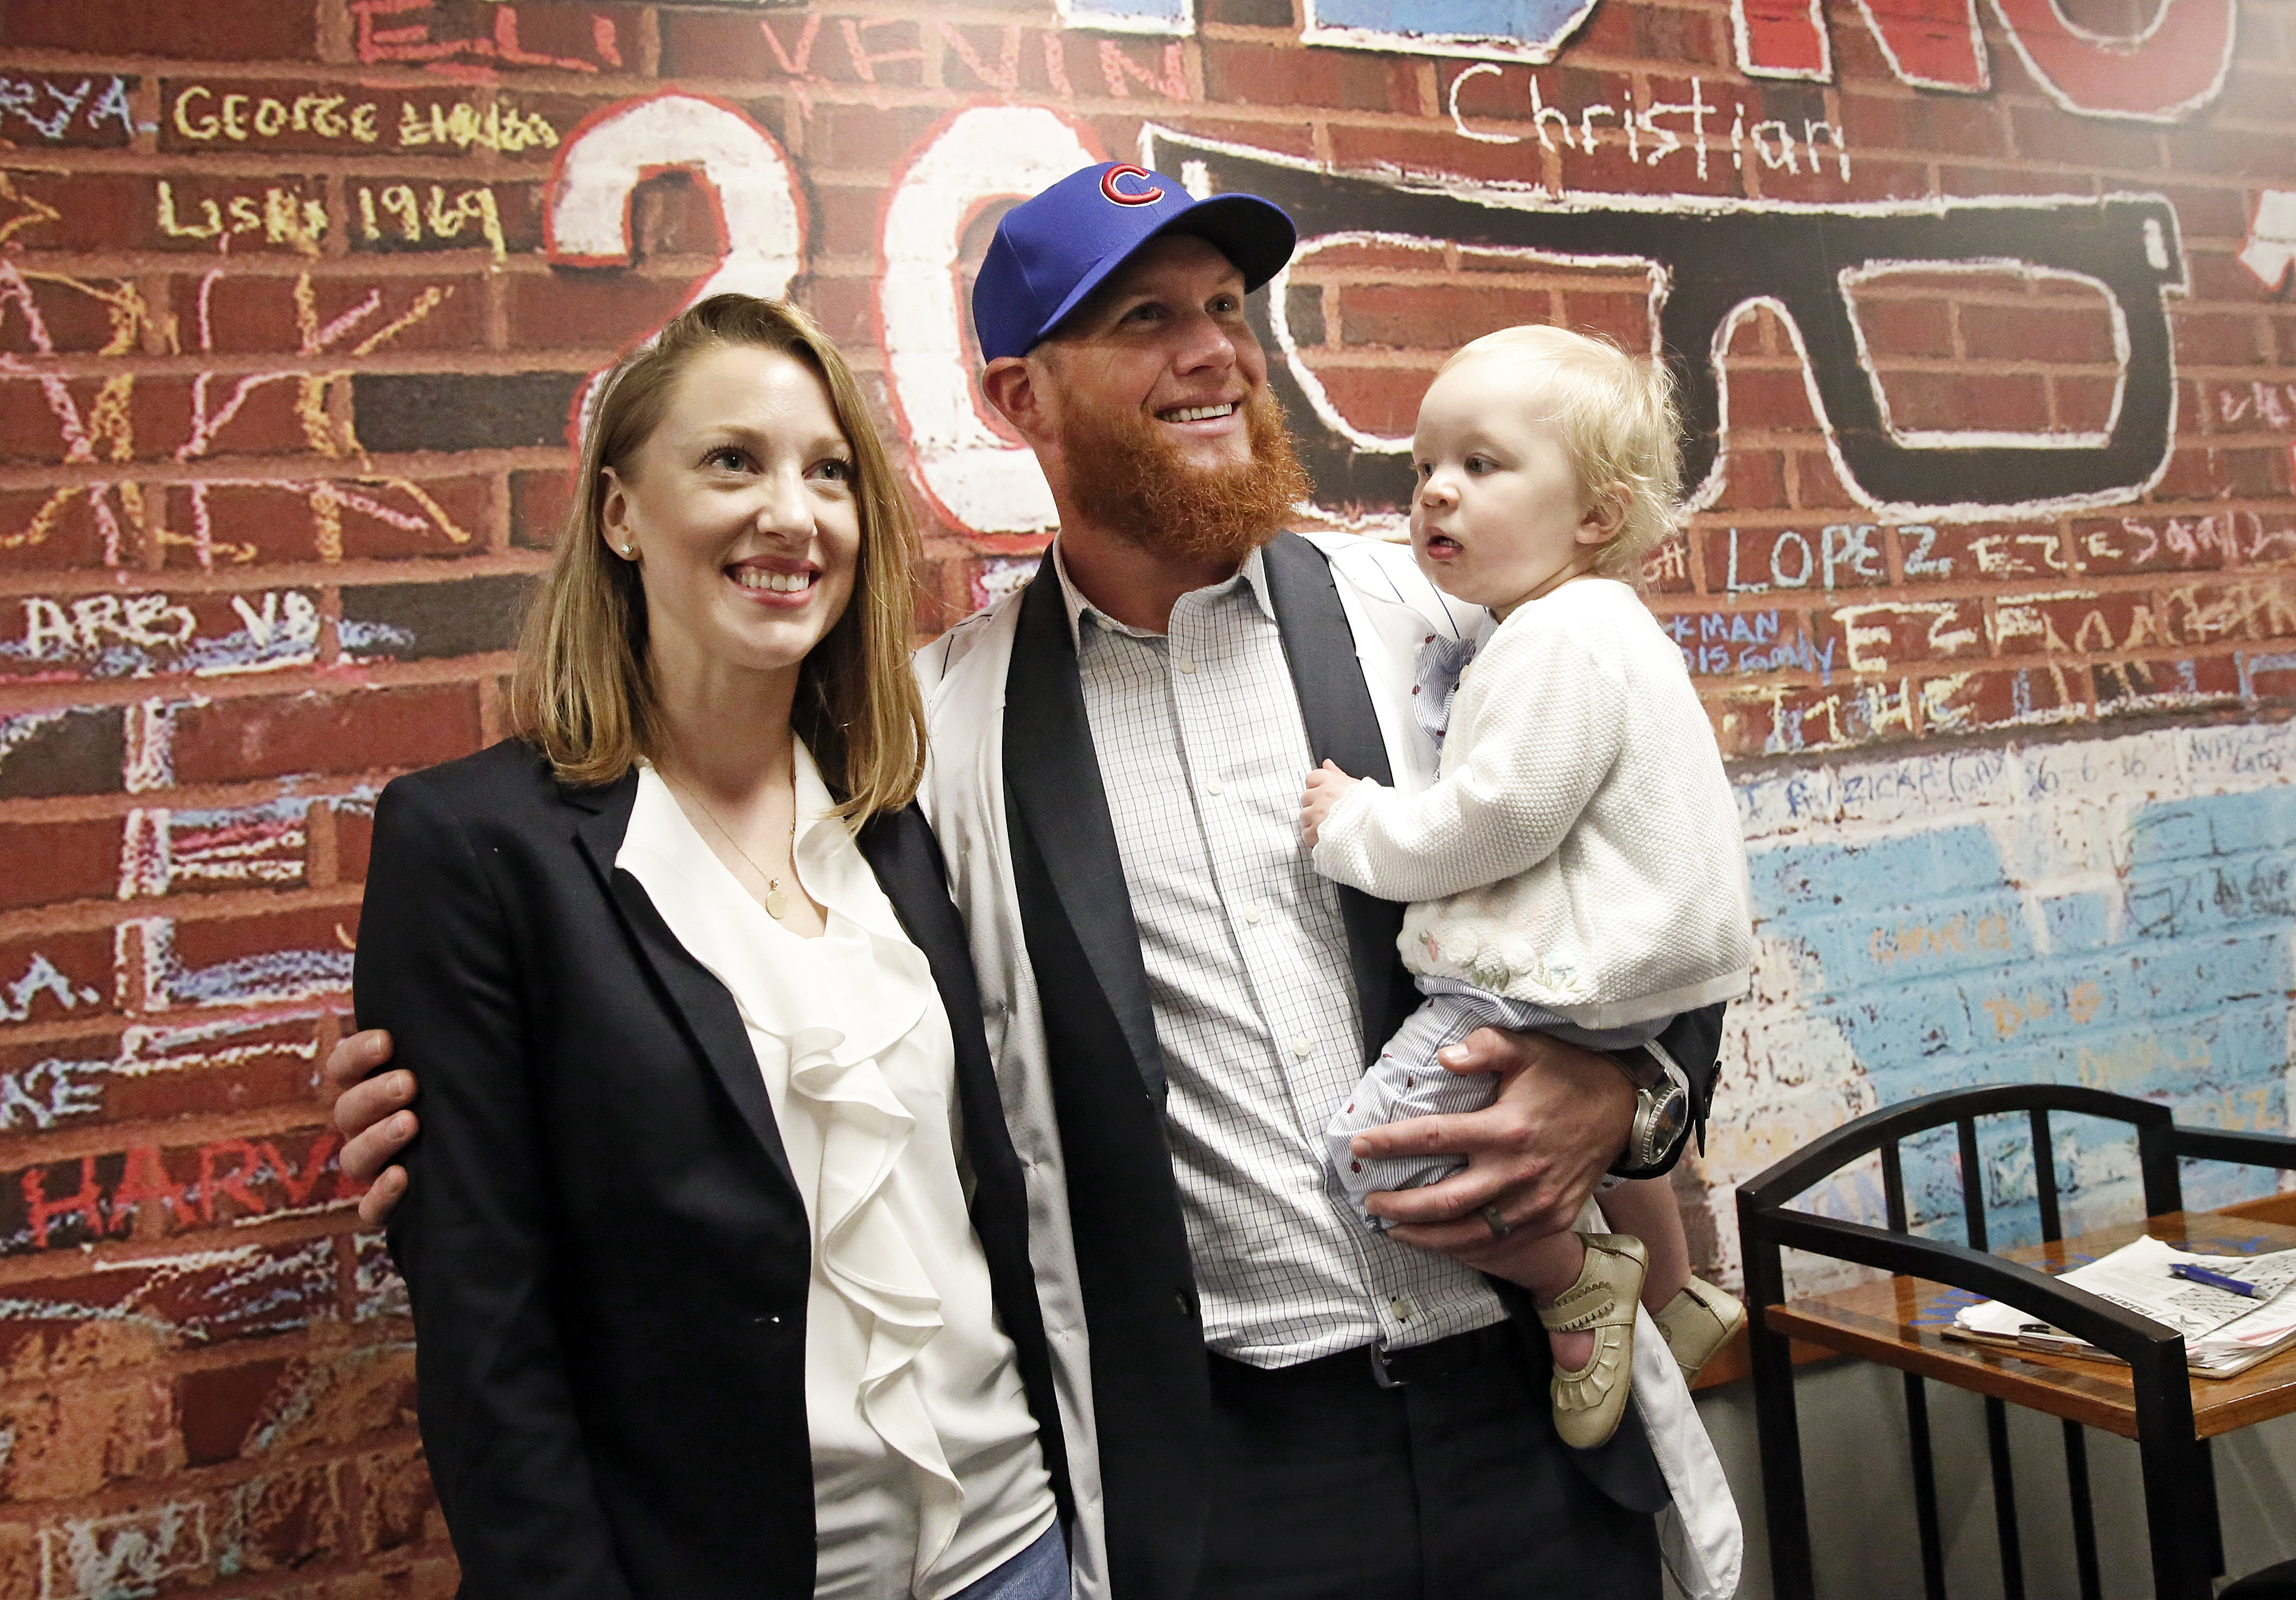 Ashley Holt Kimbrel with her husband Craig Kimbrel and their daughter Lydia Joy Kimbrel at Wrigley Field on June 7, 2019, in Chicago, Illinois. | Source: Getty Images